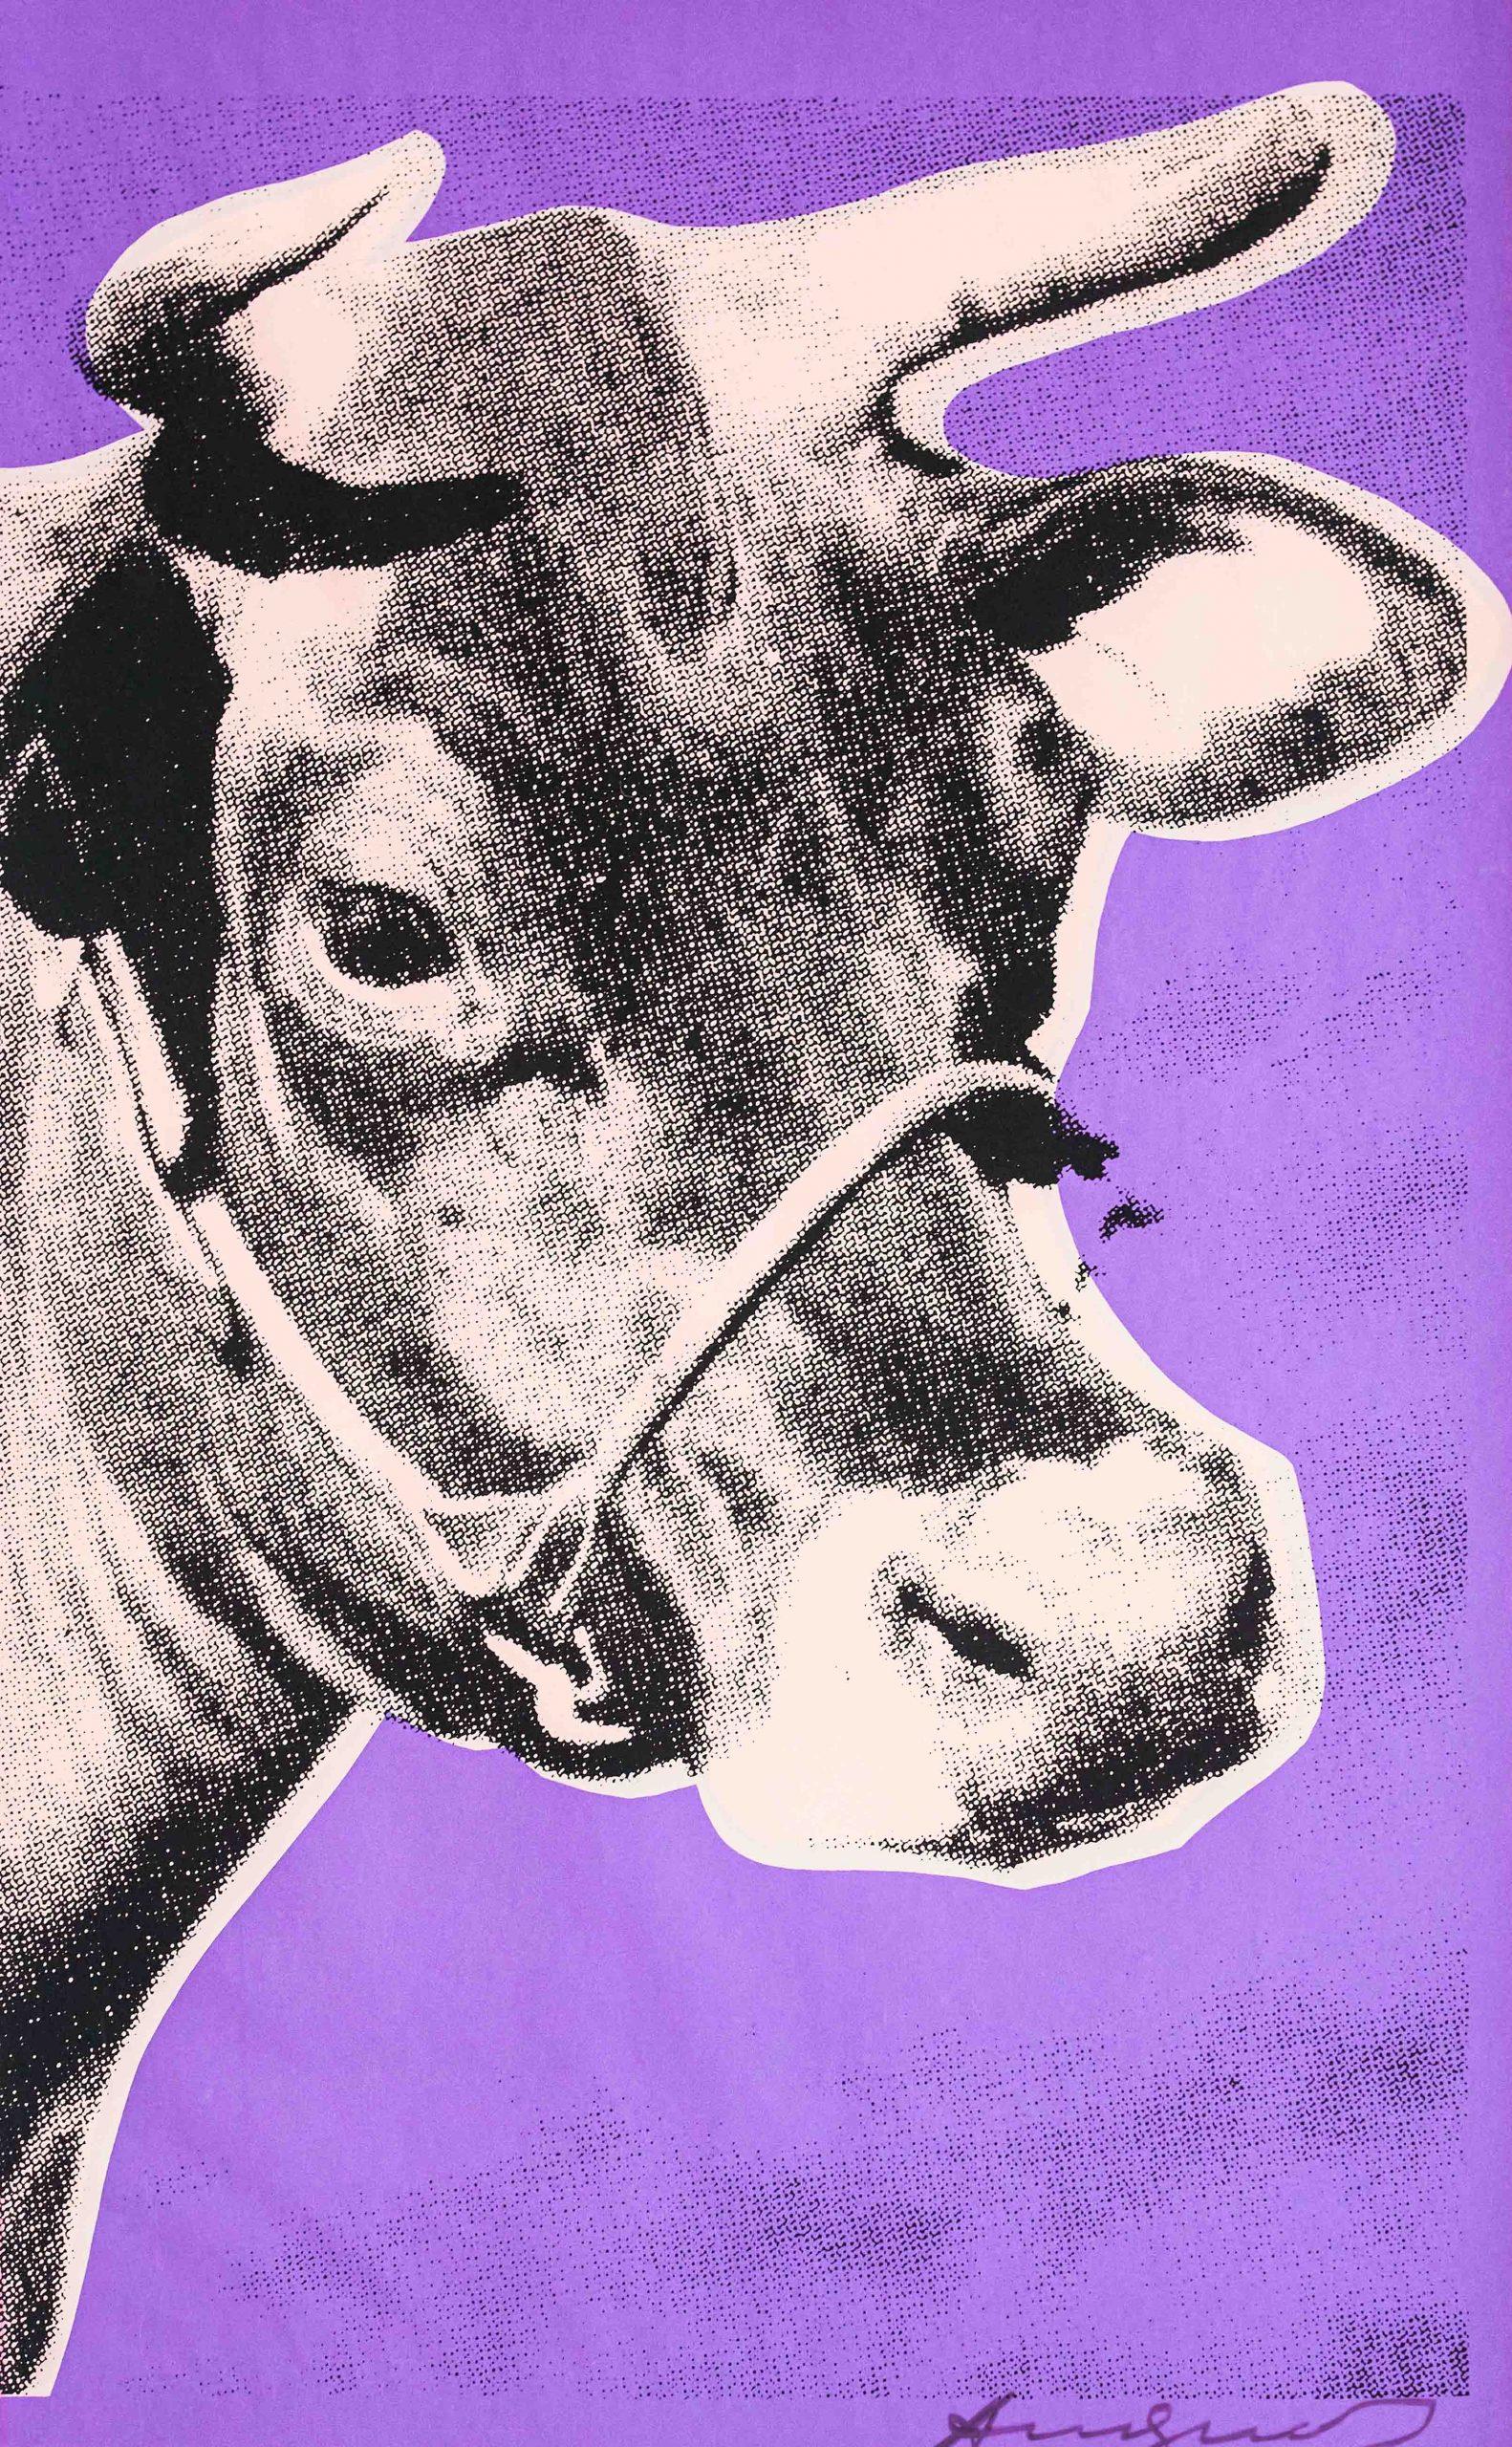 Andy Warhol's 'Cow' is a screenprint on wallpaper with trimmed margins. Signed in black felt pen lower right and part of an edition of approximately 100. Beautiful and vibrant colors.

Please reach out with any questions!